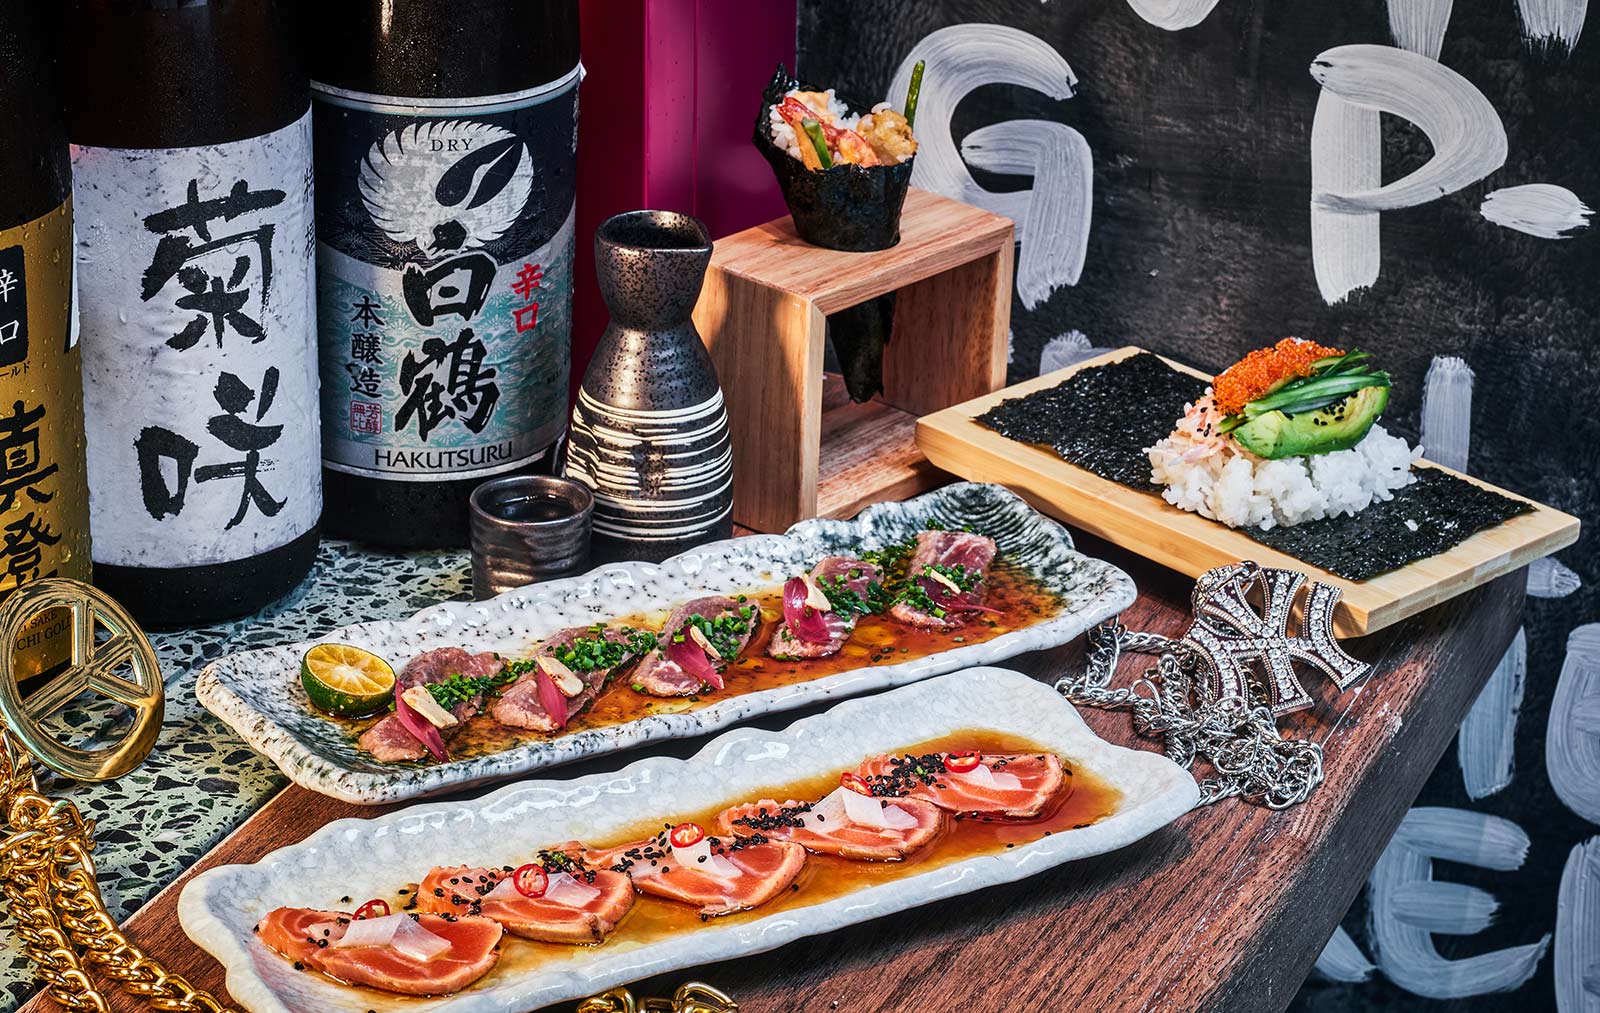 Hong Kong's best restaurants include TMK Rap & Rolls, where handrolll and sashimi are its speciality